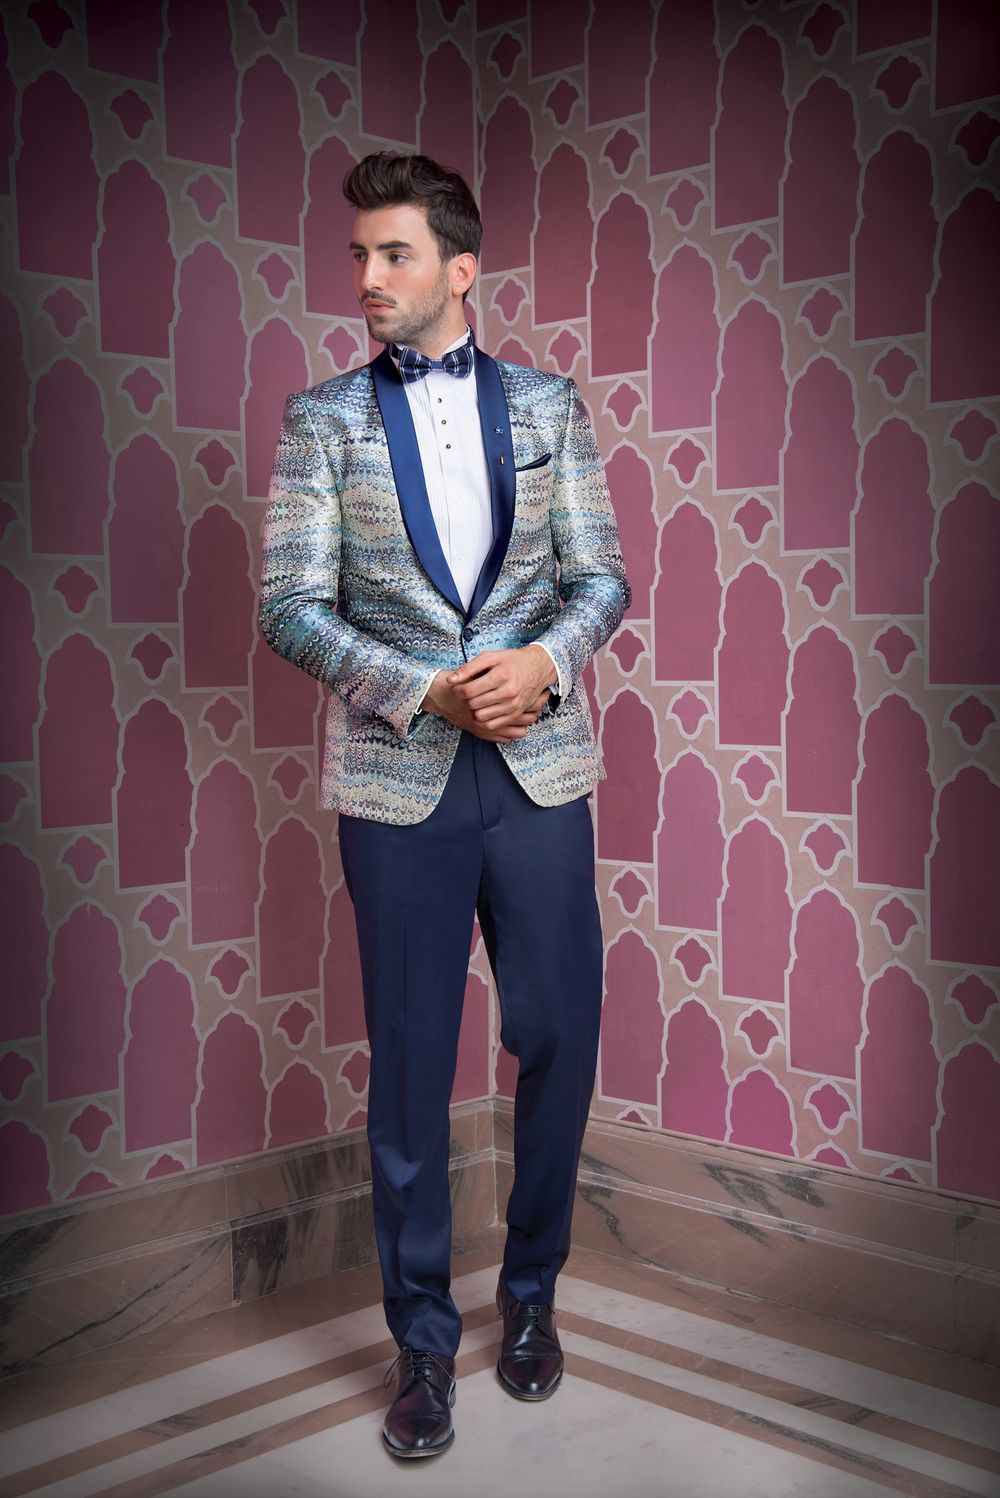 Photo of Unique printed tuxedo jacket for groom